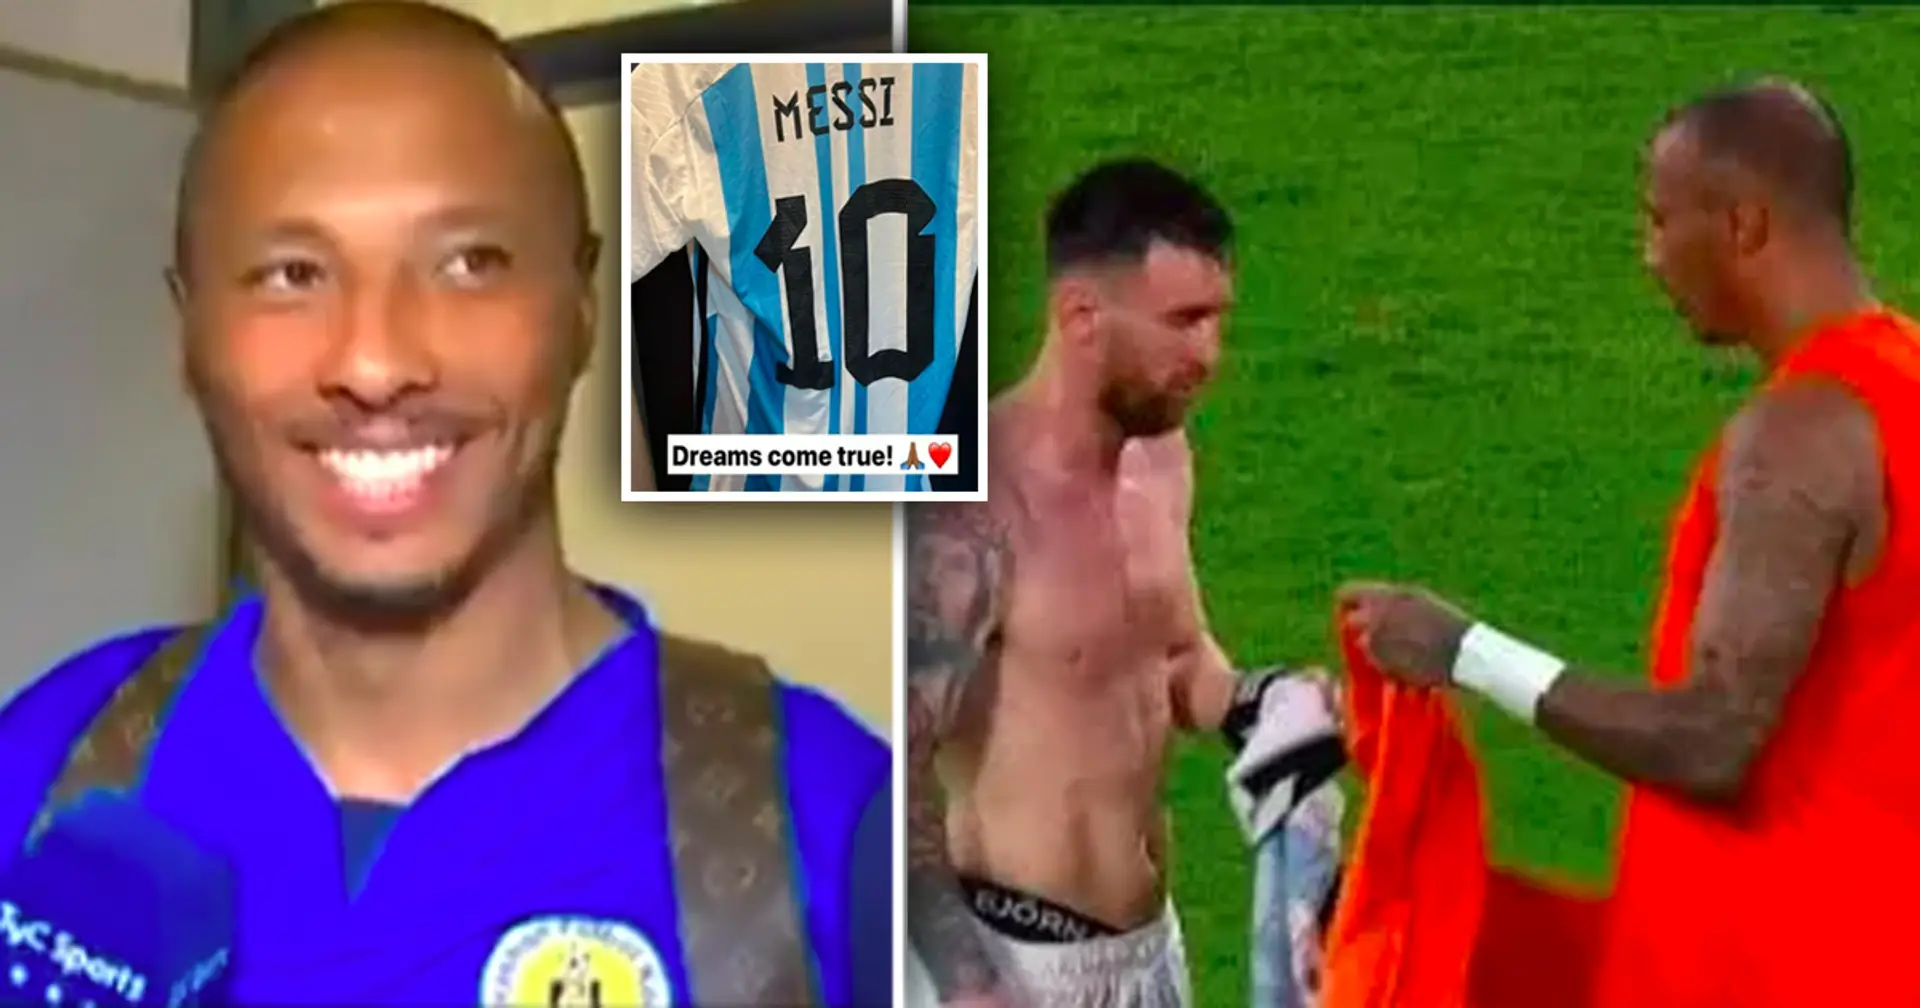 'I'm never taking it off now, even to sleep': Curacao GK talks swapping shirts with Messi after conceding 7 goals